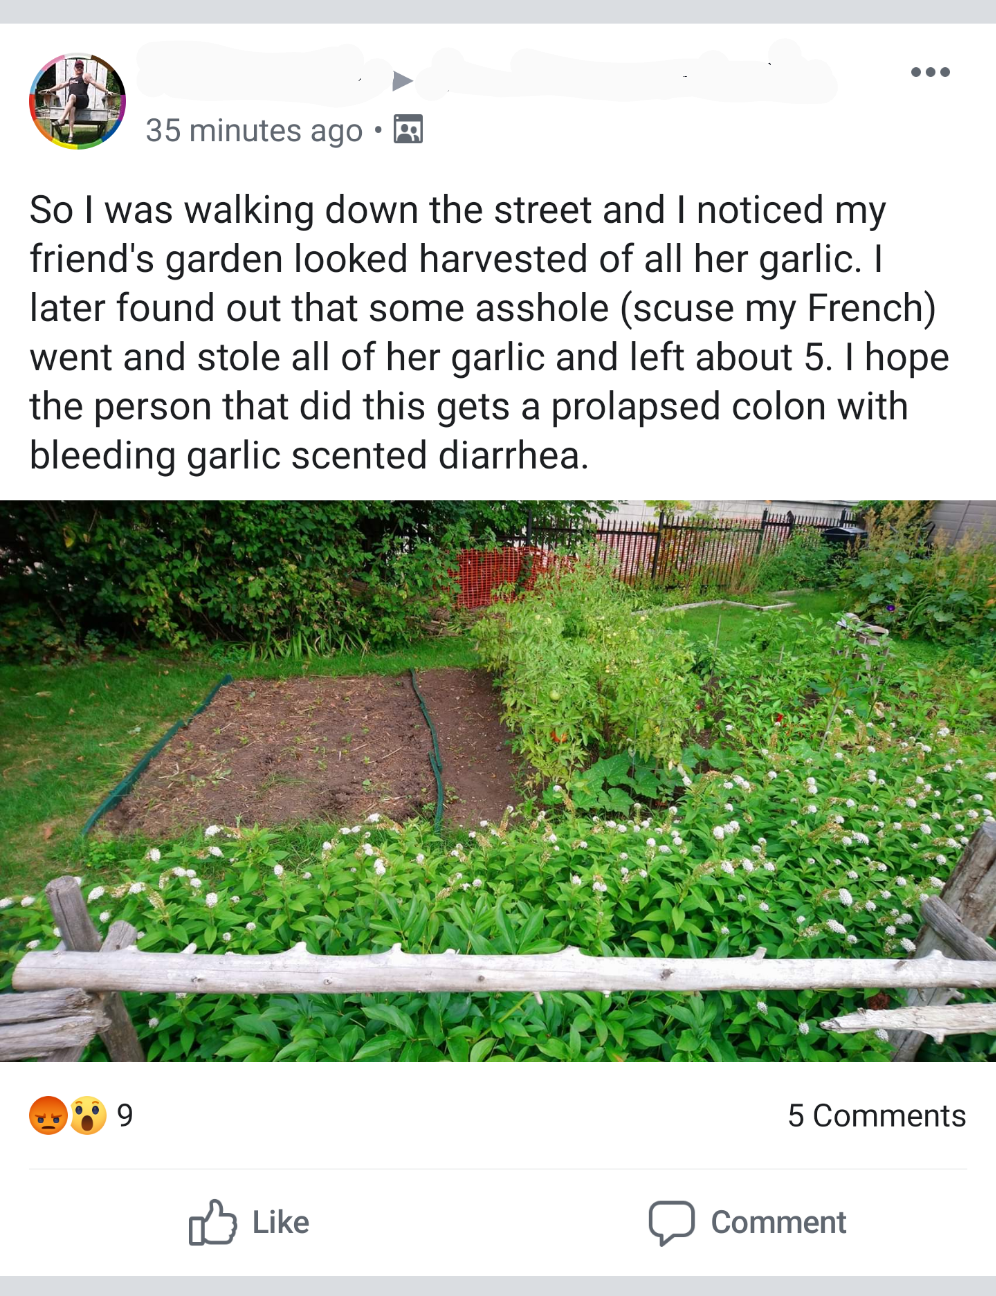 grass - 35 minutes ago. So I was walking down the street and I noticed my friend's garden looked harvested of all her garlic. later found out that some asshole scuse my French went and stole all of her garlic and left about 5. I hope the person that did t